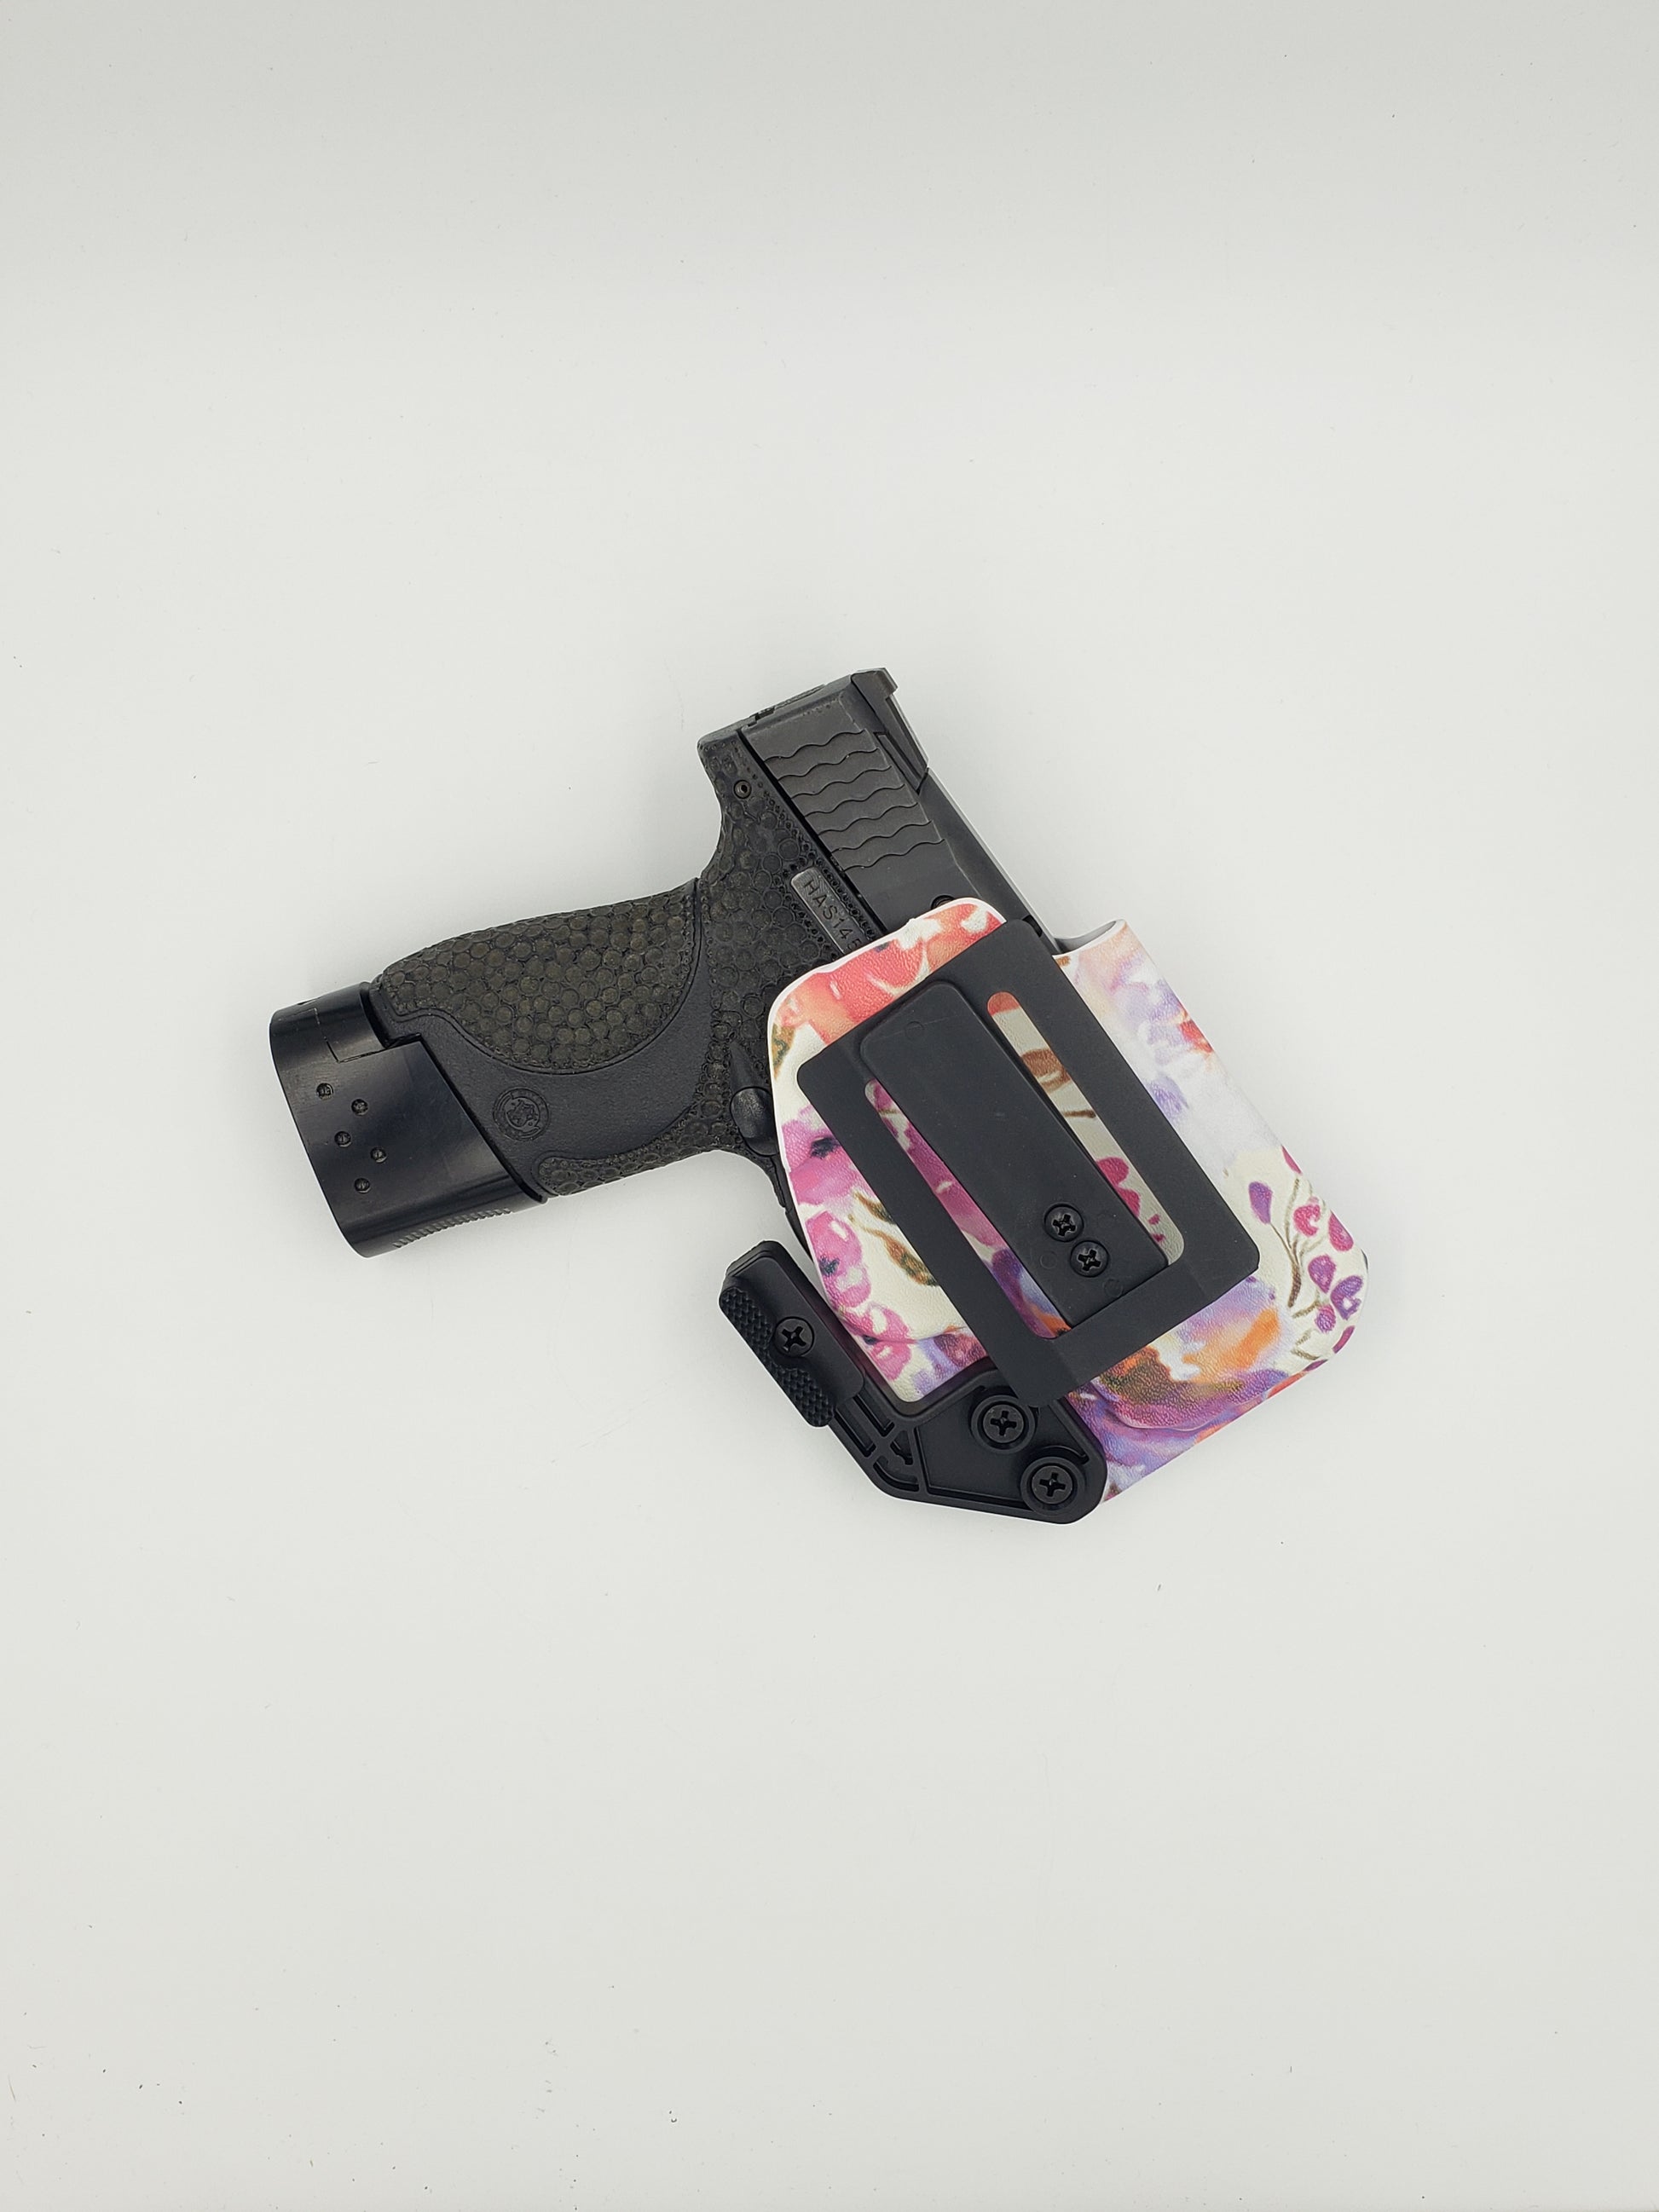  bosumbuddy Conceal Carry Holster for Women, Kydex Bra Holster  S&W M&P 9mmShiledEZ/380EZ/PerfCtr(Pink Logo) : Sports & Outdoors